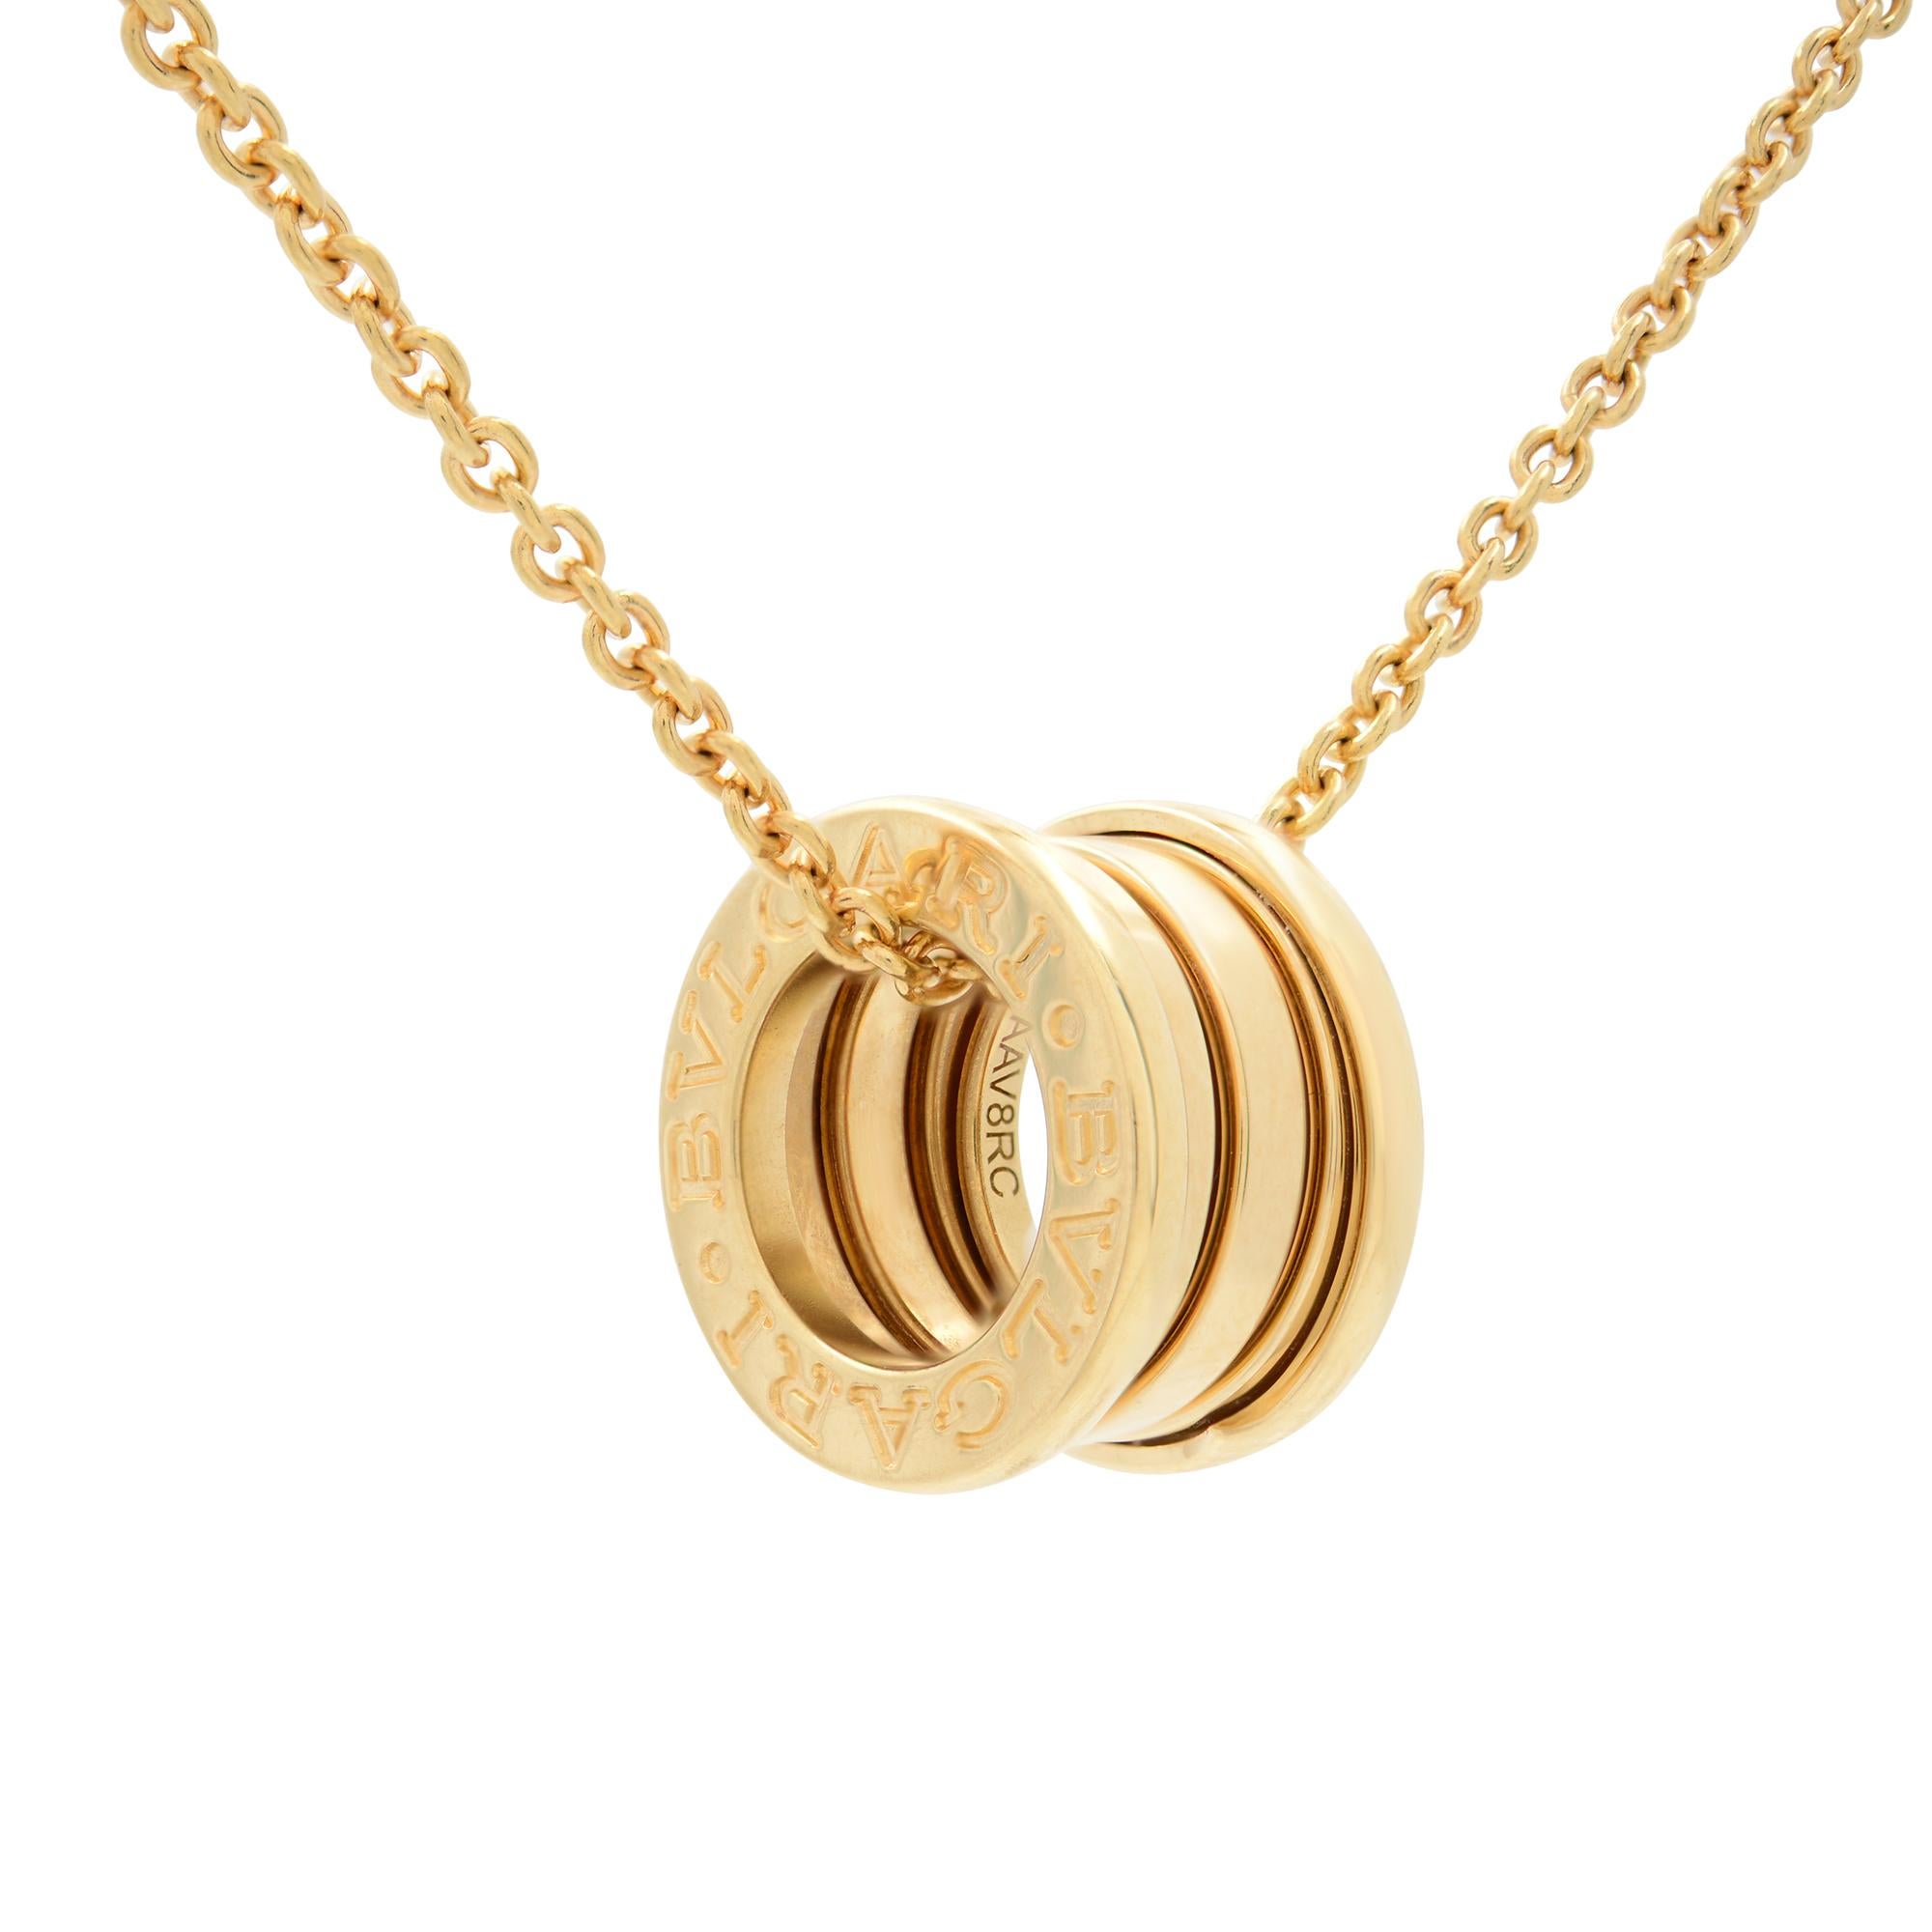 Bvlgari minimalist yet classy and elegant necklace from B.Zero 1 collection.  Crafted in 18k yellow gold, it flaunts the iconic  ring as the pendant. A delicate piece of jewelry that accents almost every outfit with grace and panache and is a